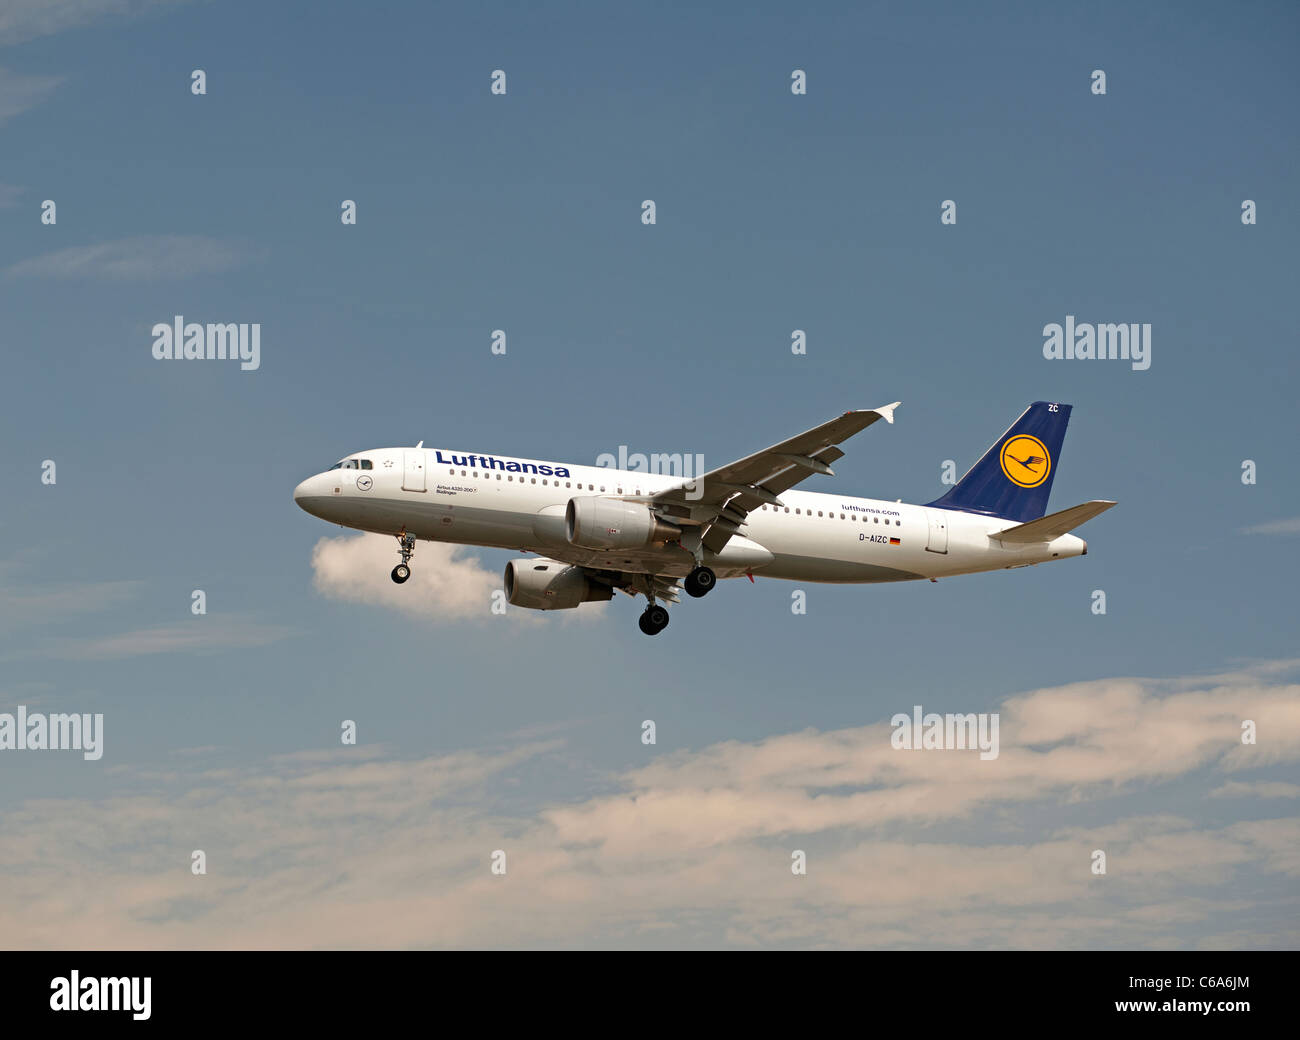 Lufthansa Airbus 320-200 Airliner approaching London Heathrow Airport LHR.  SCO 7568 Stock Photo